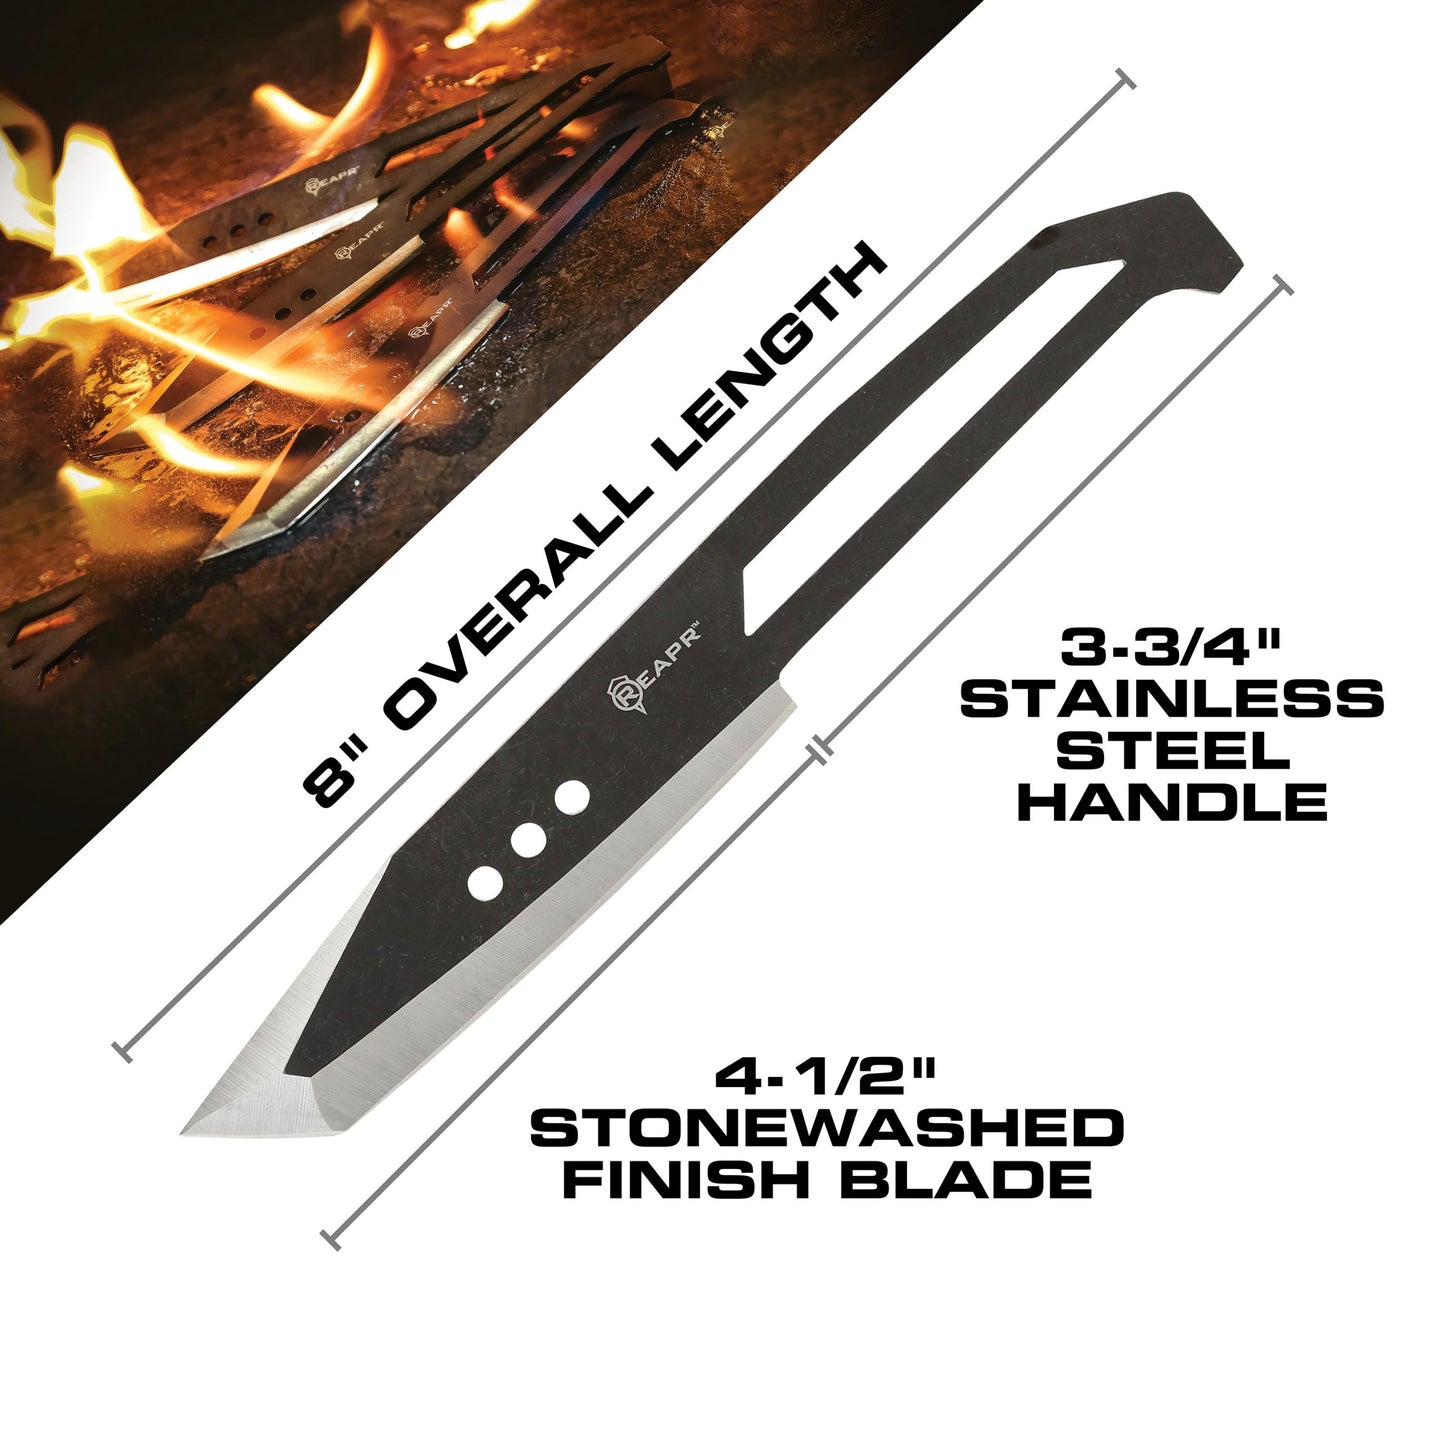 Hit the bullseye every time with these perfectly-balanced throwers. The Reapr 3 Piece Chuk Knives set is ideal for camping, parties, barbecues, and other outdoor activities. www.defenceqstore.com.au